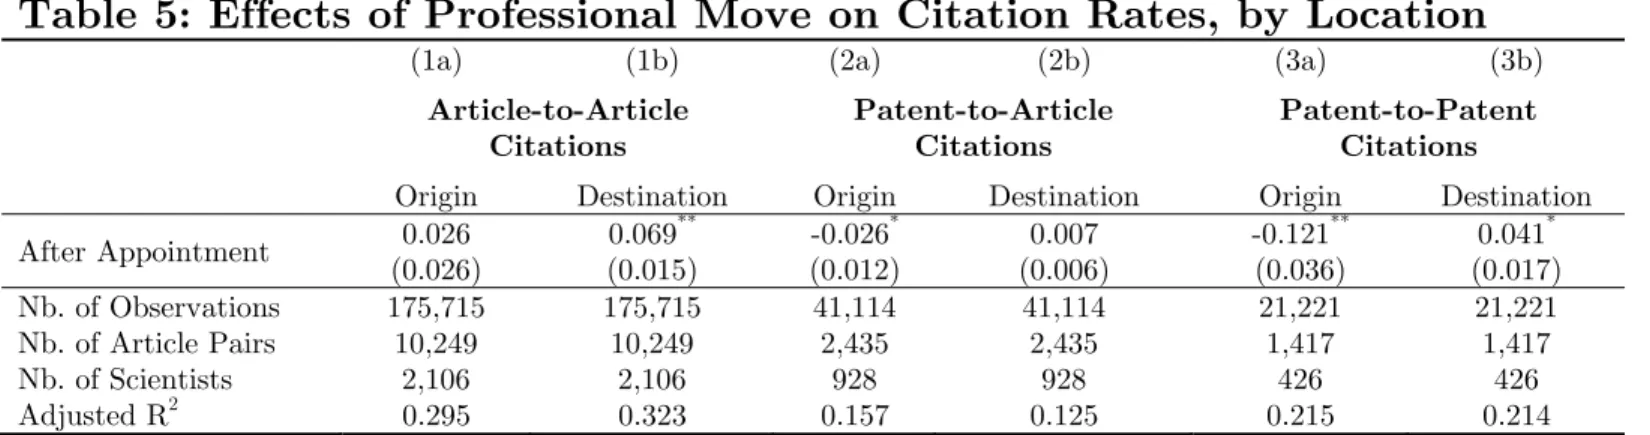 Table 5: Effects of Professional Move on Citation Rates, by Location 